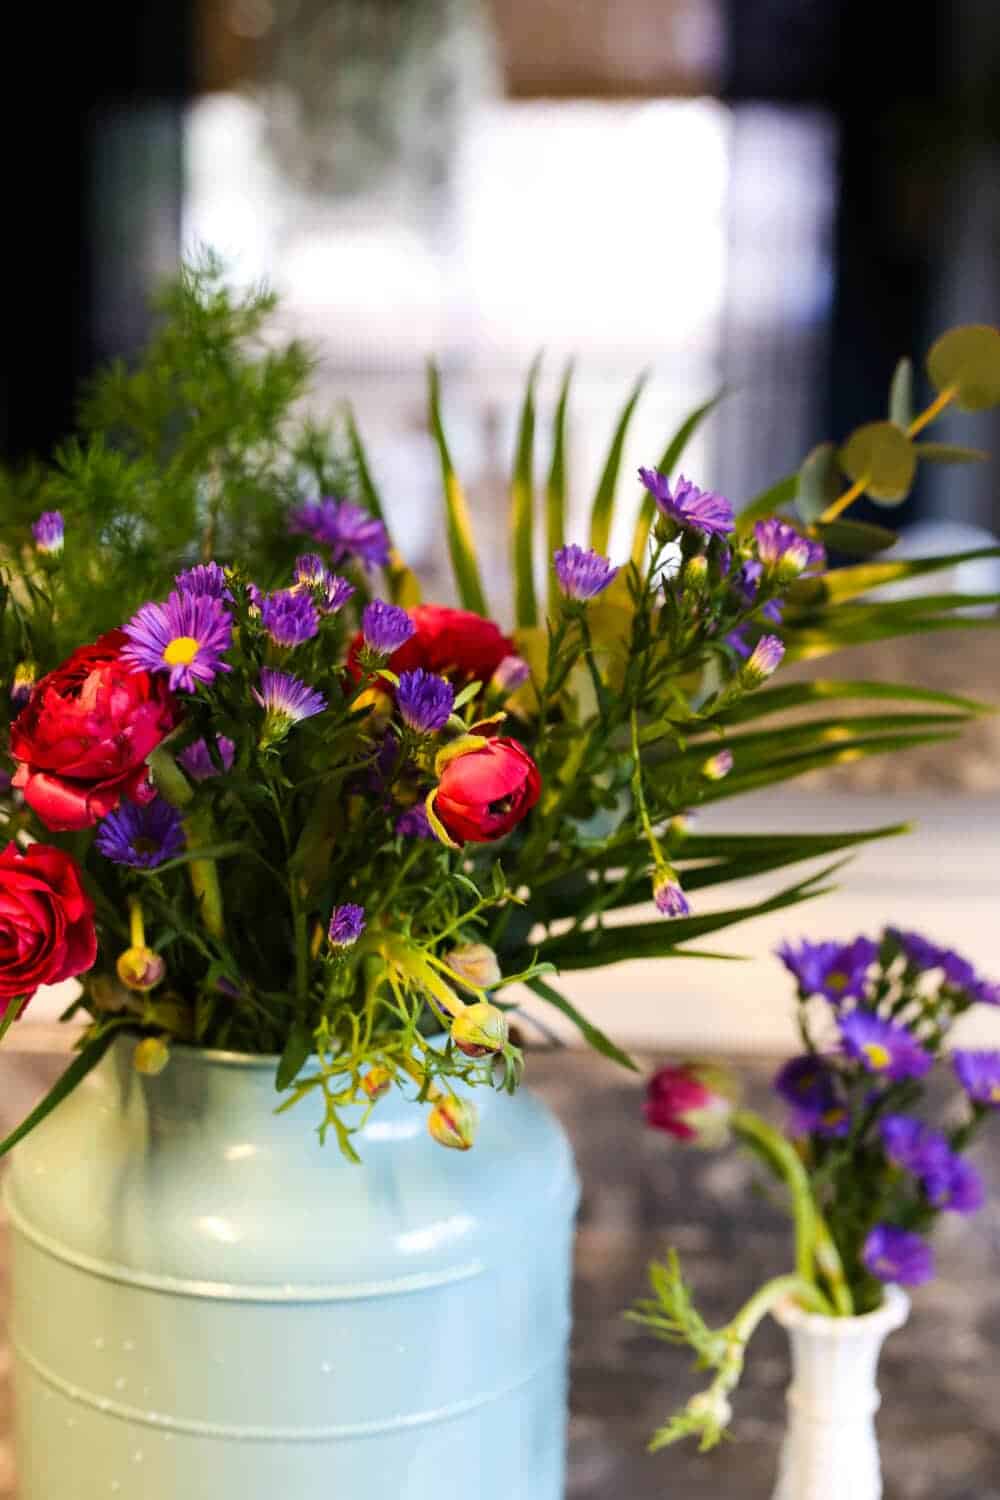 How to Make Cheap Grocery Store Flowers Look Expensive